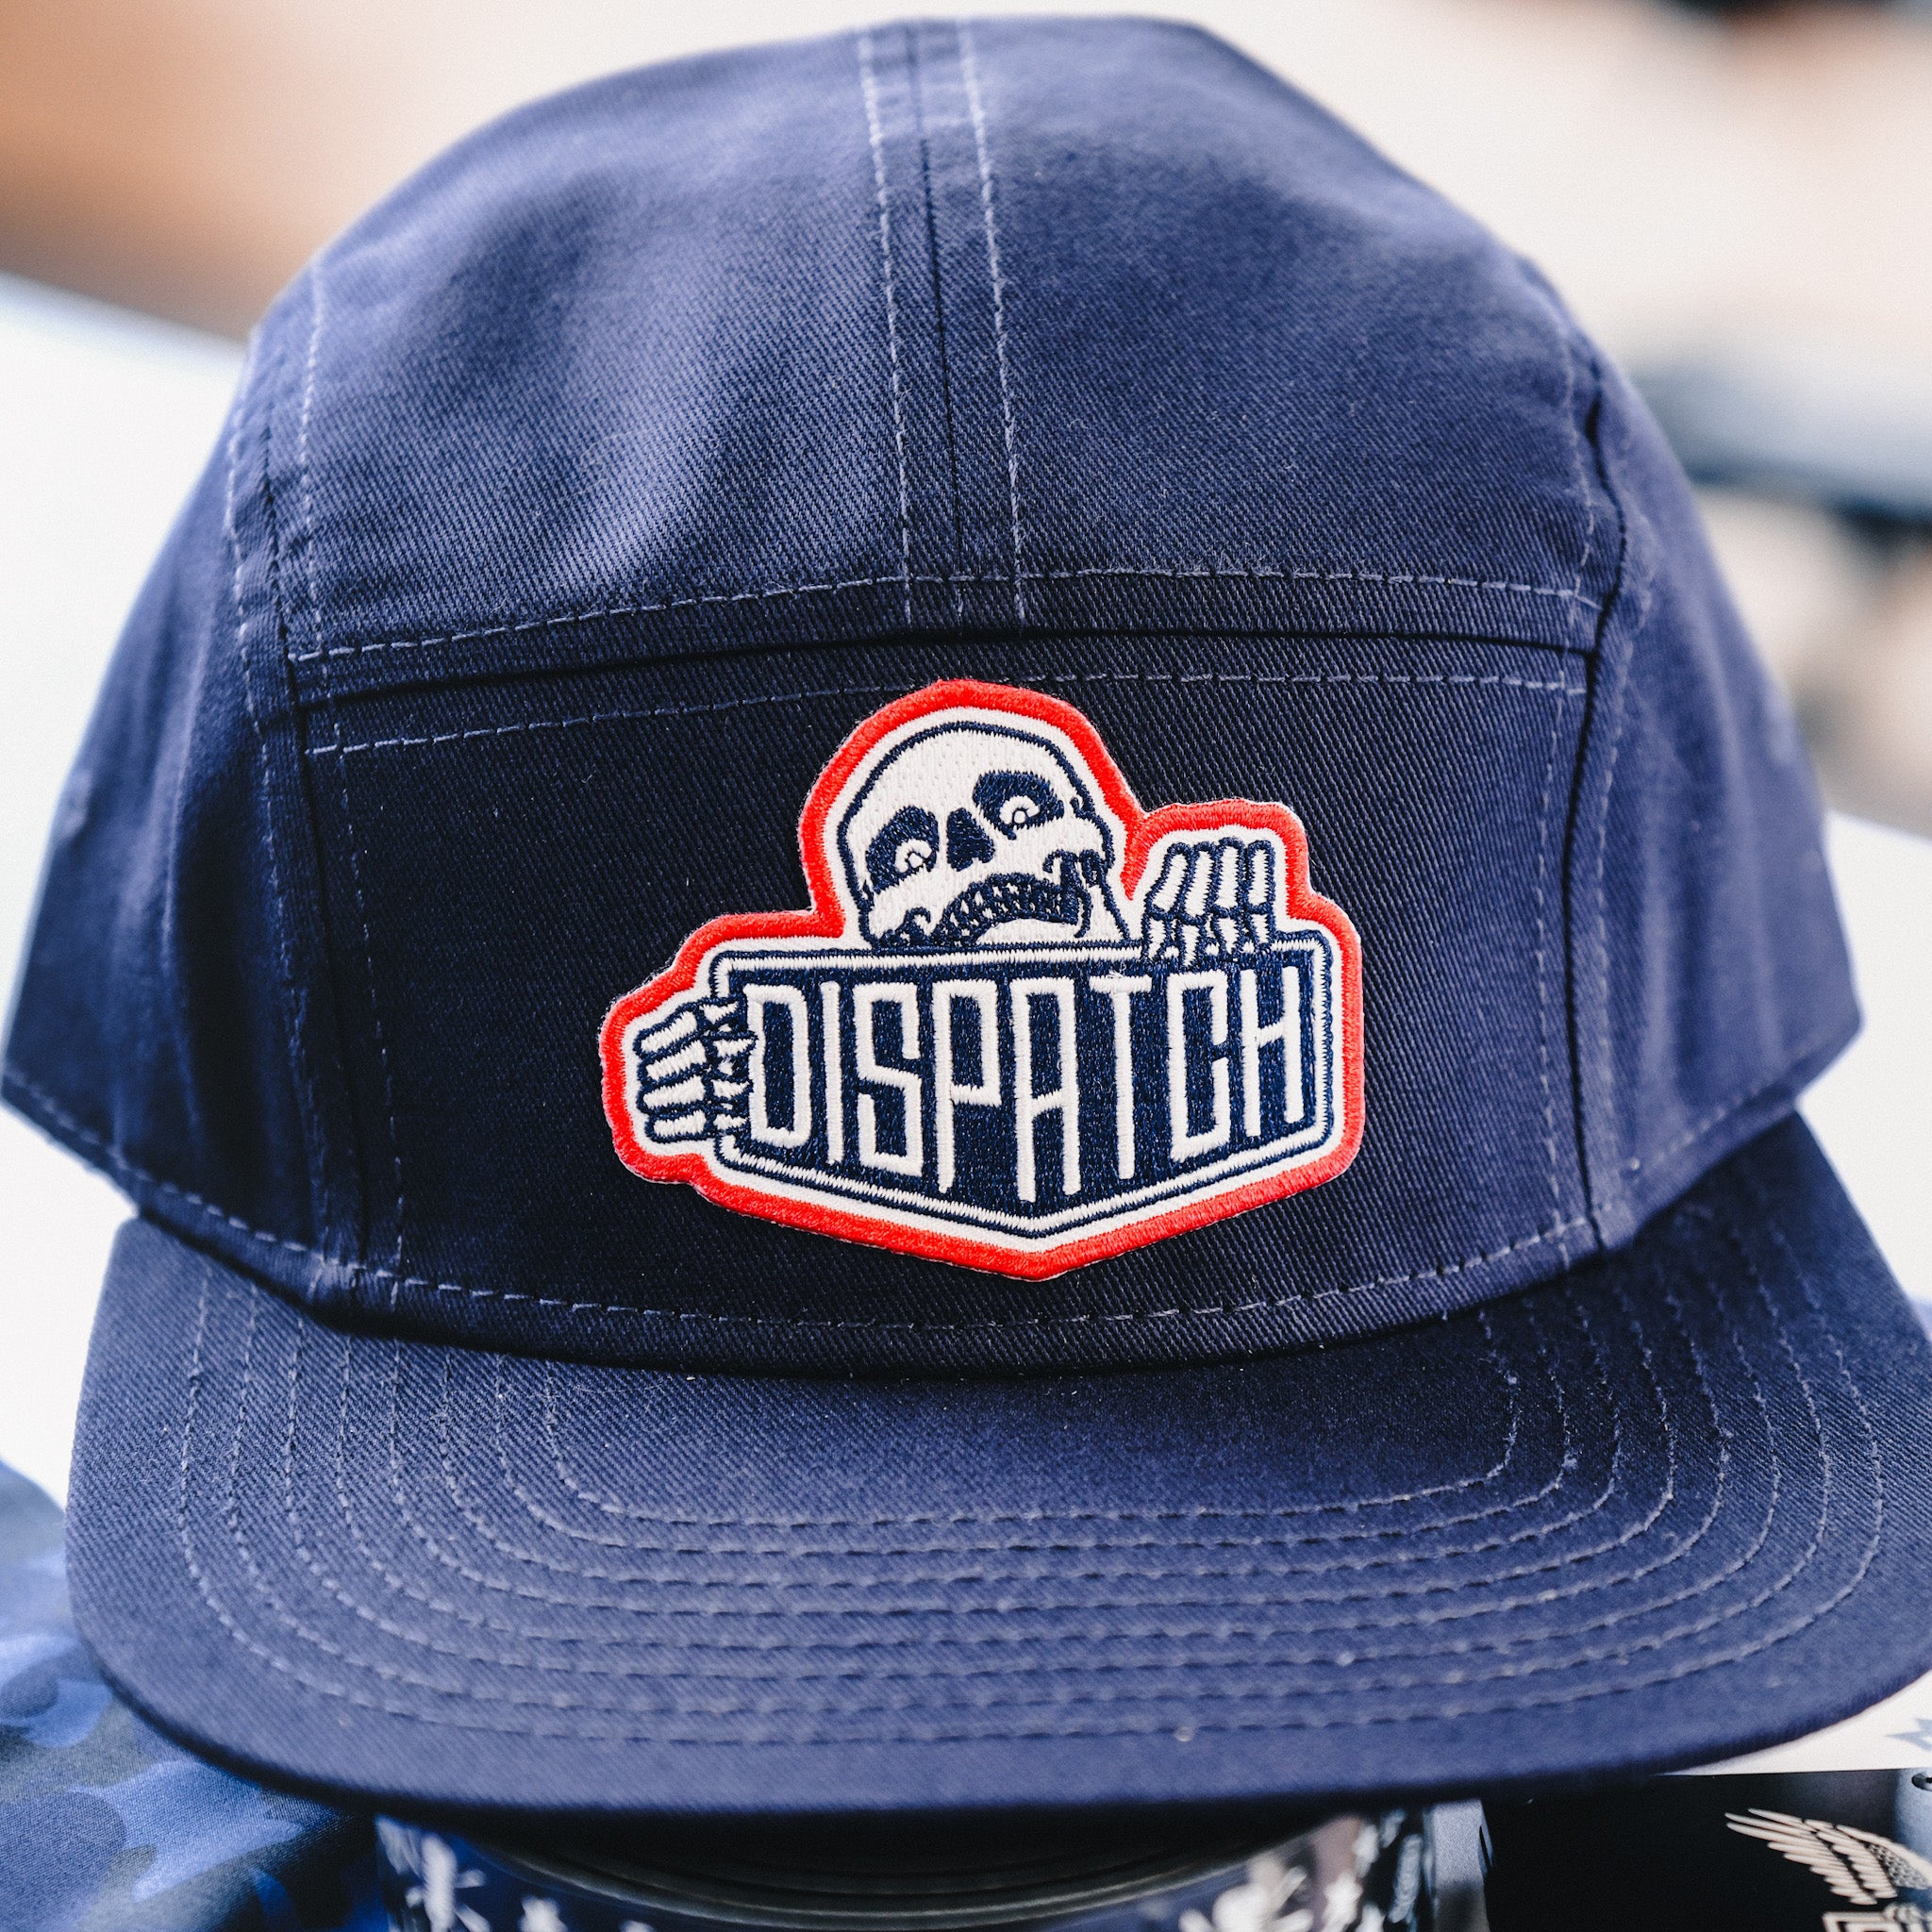 Allied Snap Back %Price